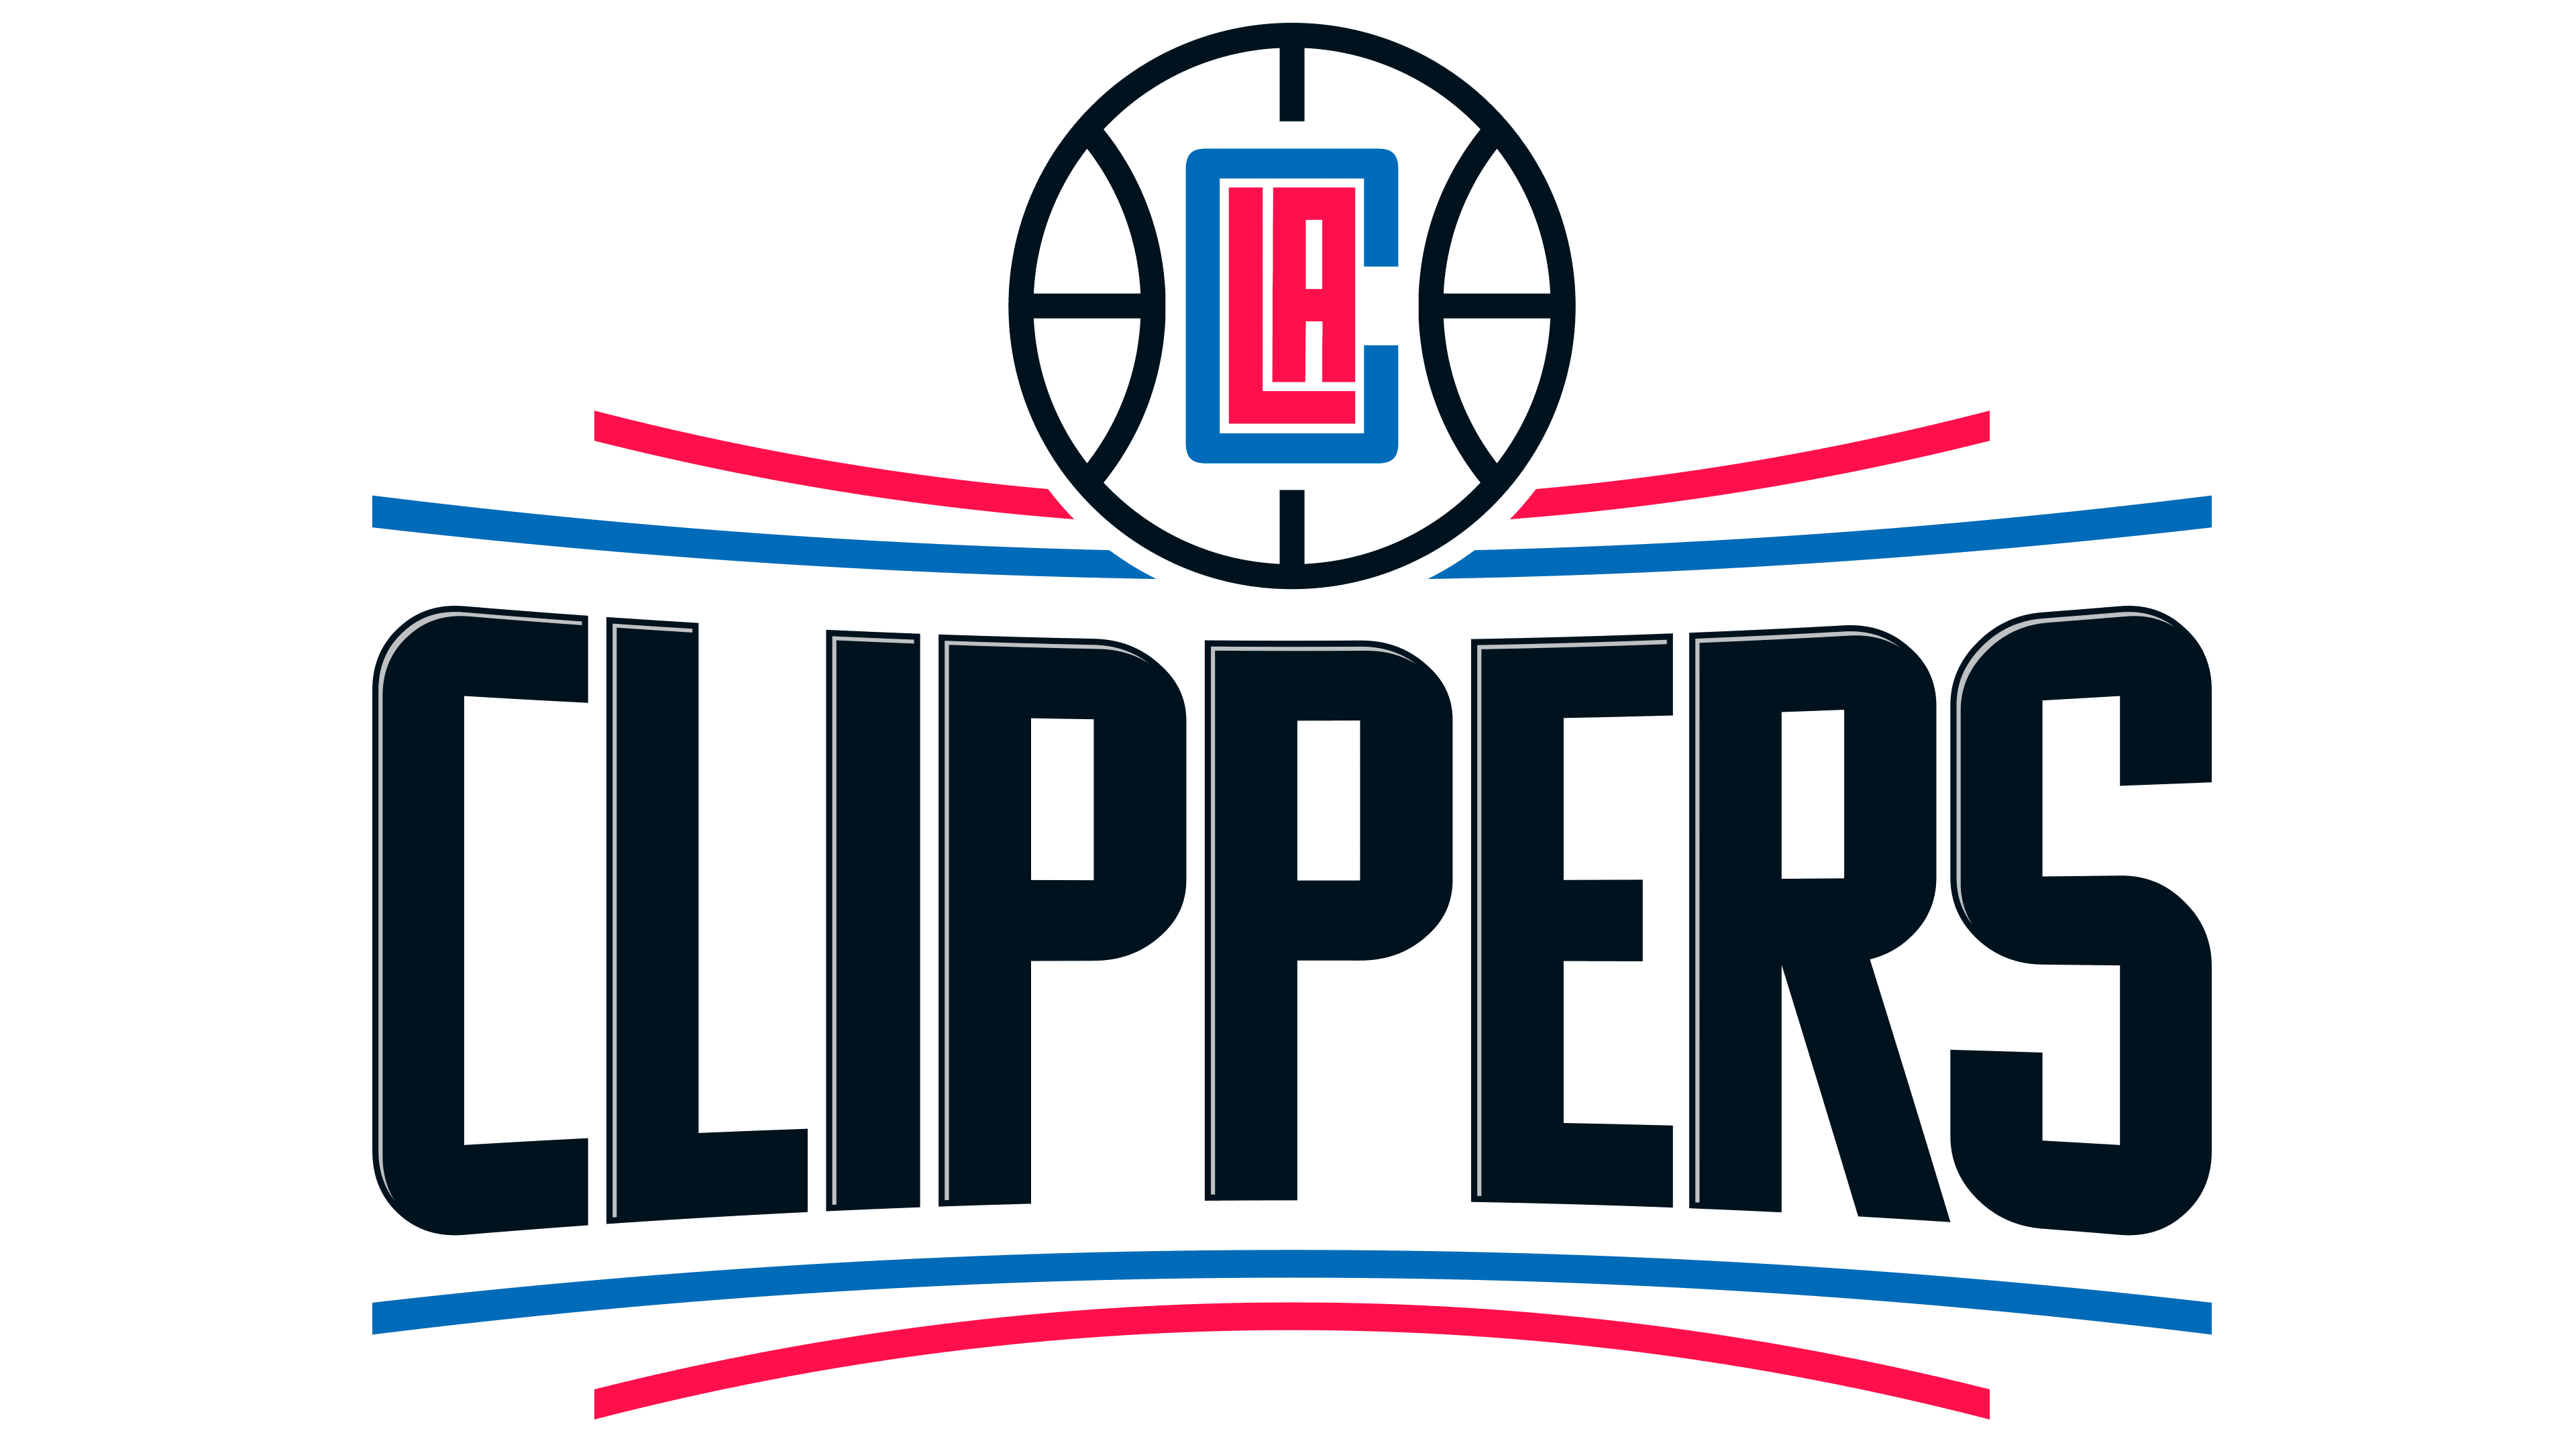 Pin by Bflojotd on Braves in 2023  Basketball legends, Los angeles clippers,  Nba logo